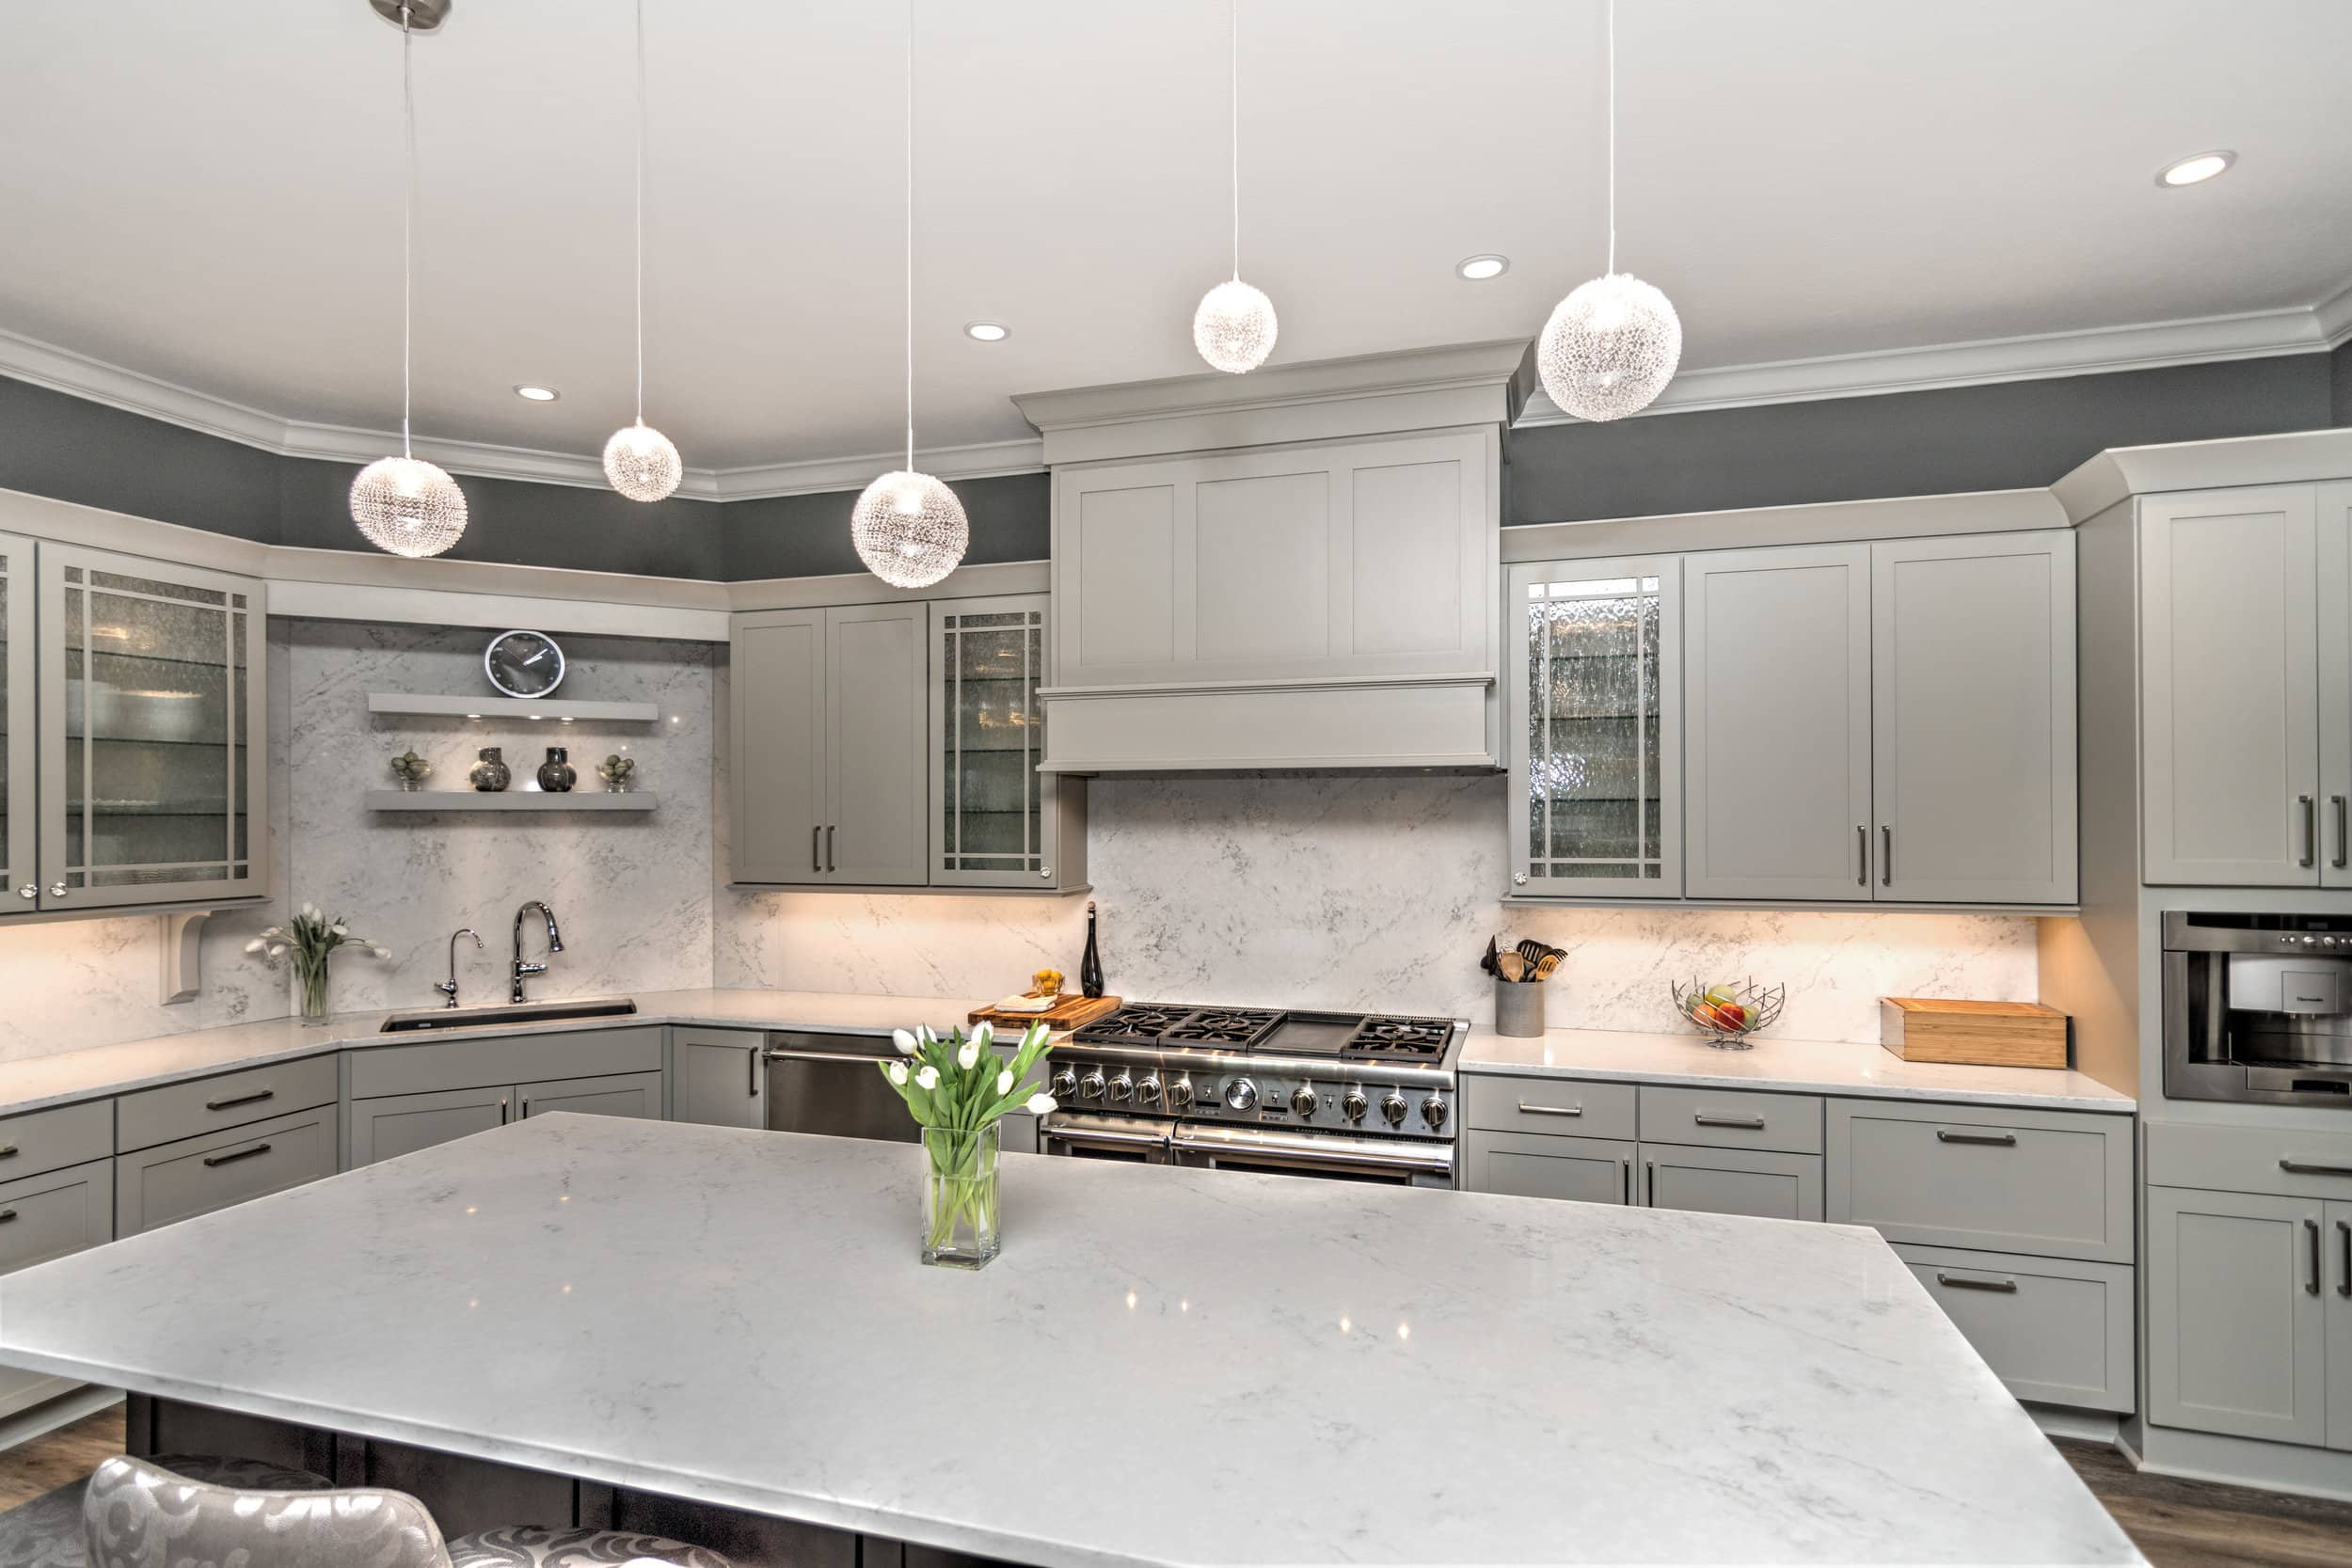 A custom kitchen with gray cabinets and marble counter tops designed by a Custom Home Builder Carmel Indiana.